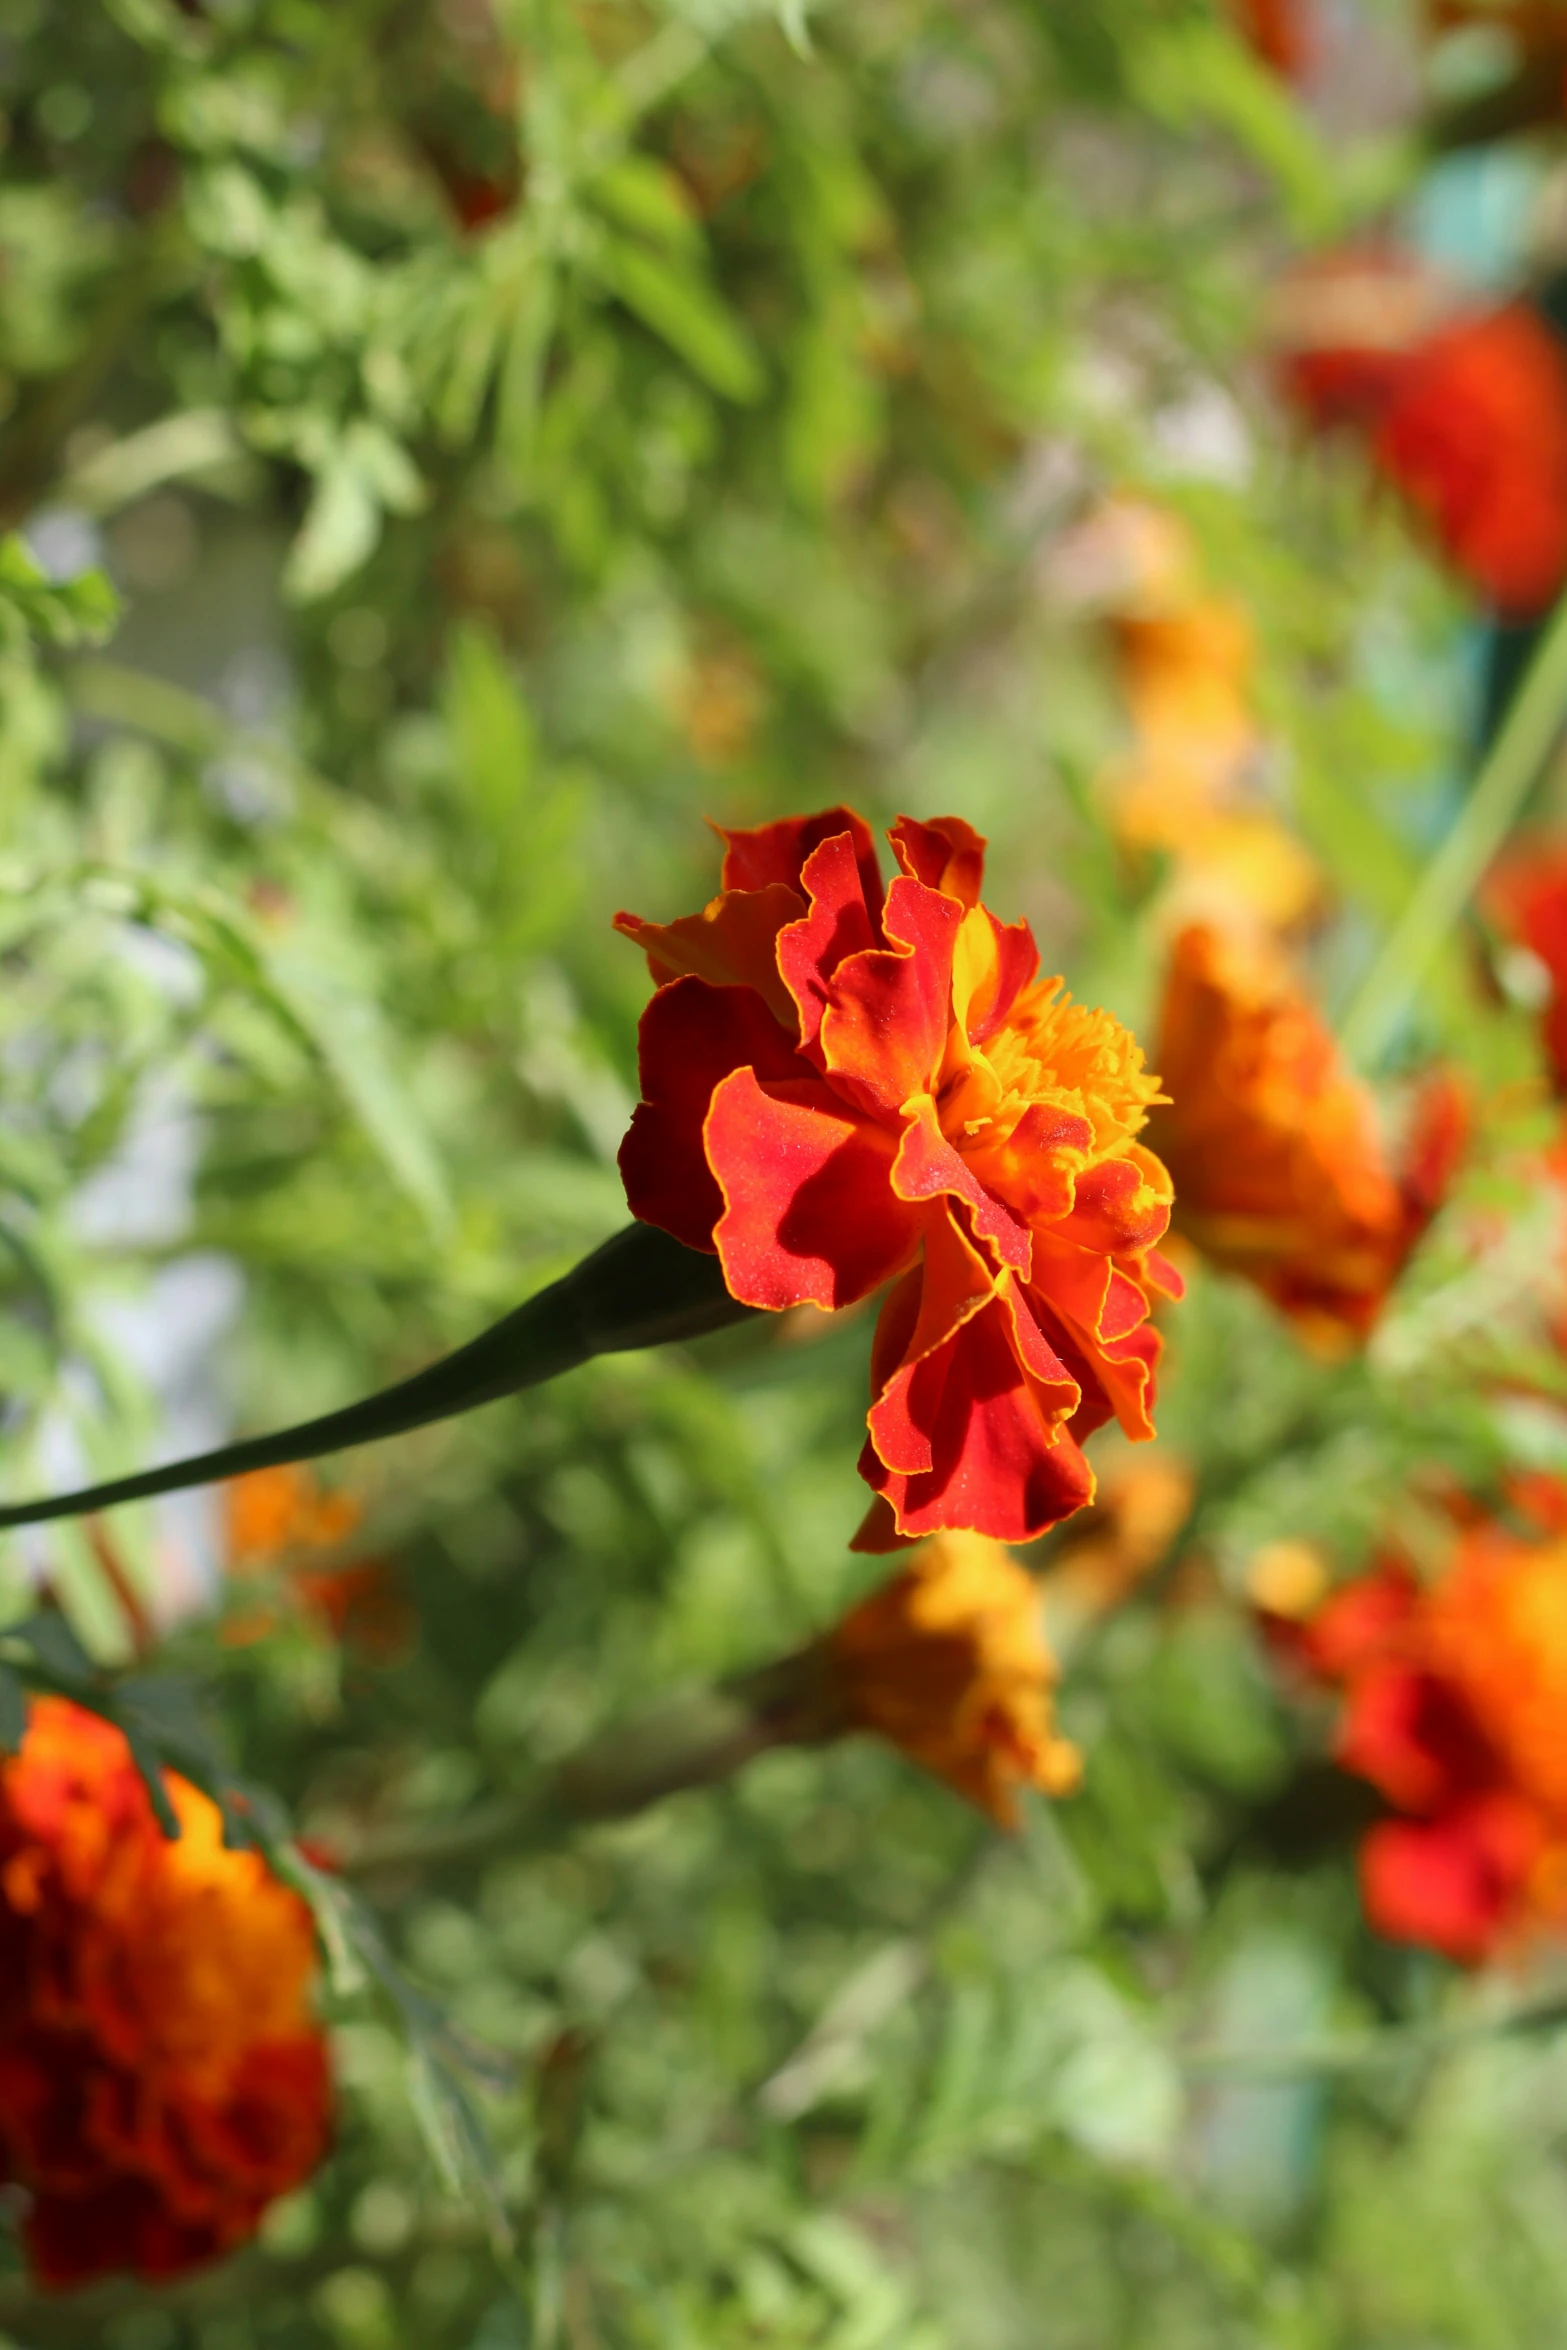 the orange and yellow flowers bloom on the plants